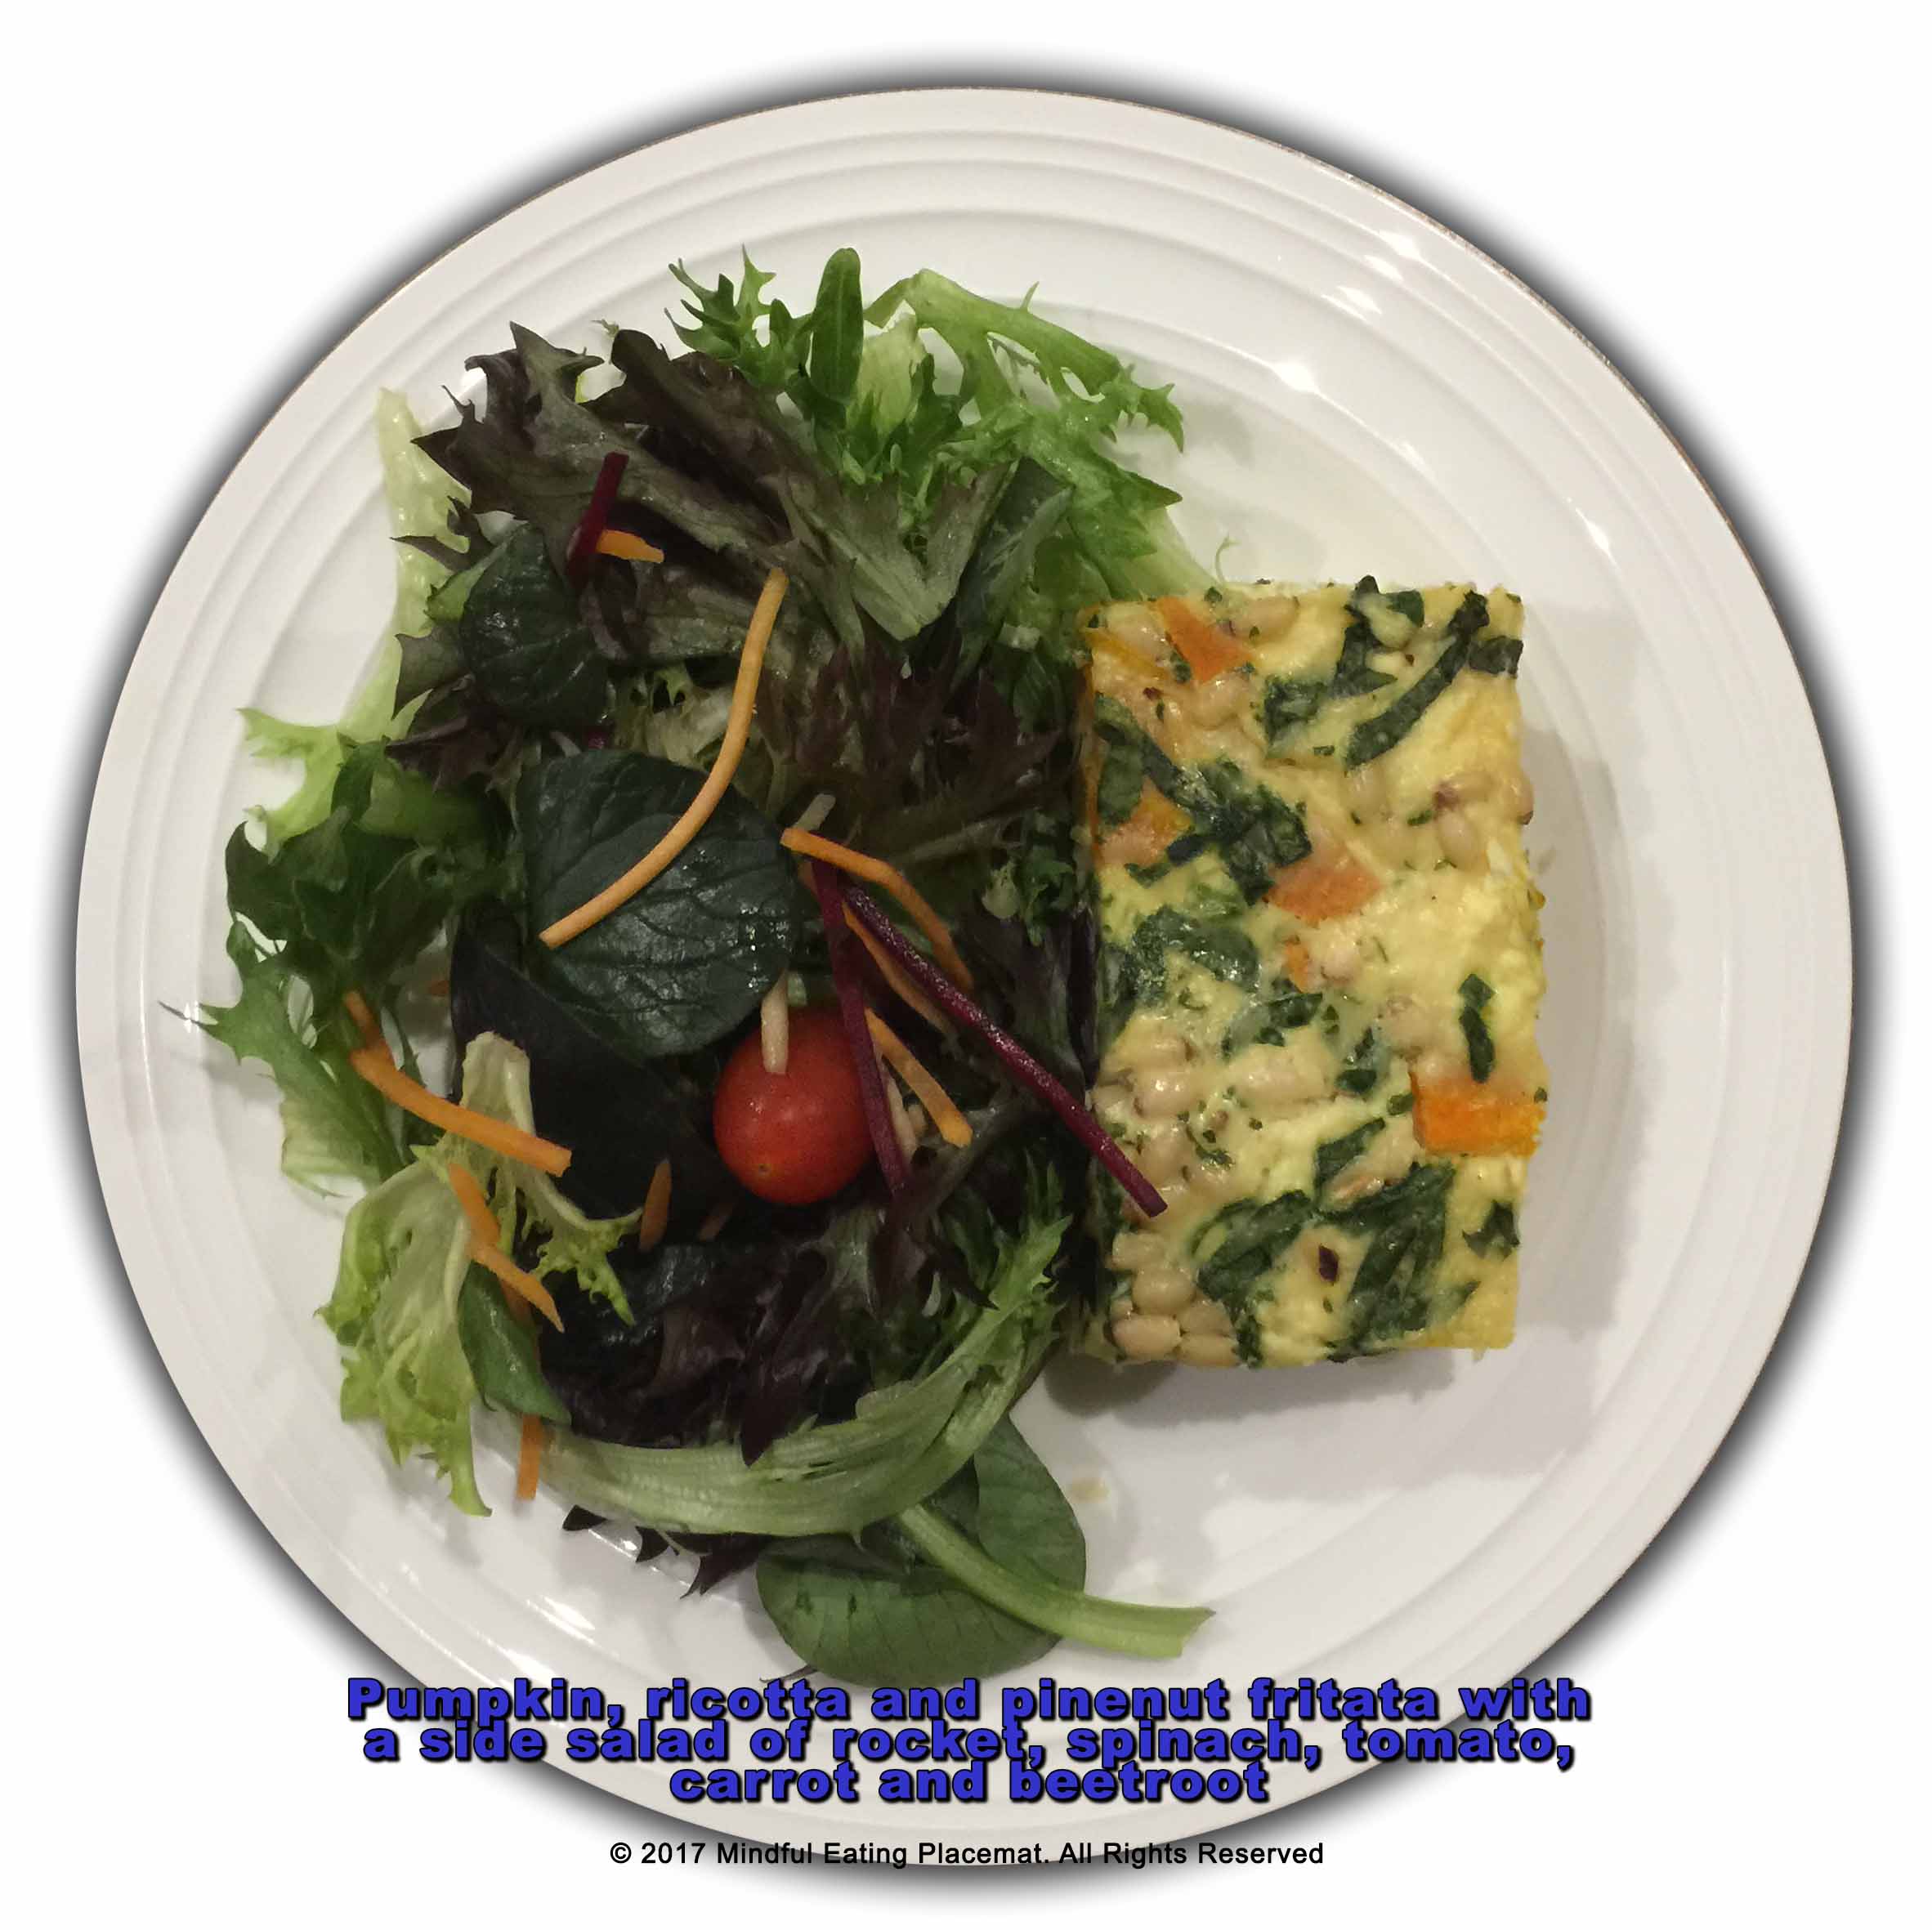 Pumpkin, ricotta and pinenut fritata with a side salad of rocket, spinach, tomato, carrot and beetroot